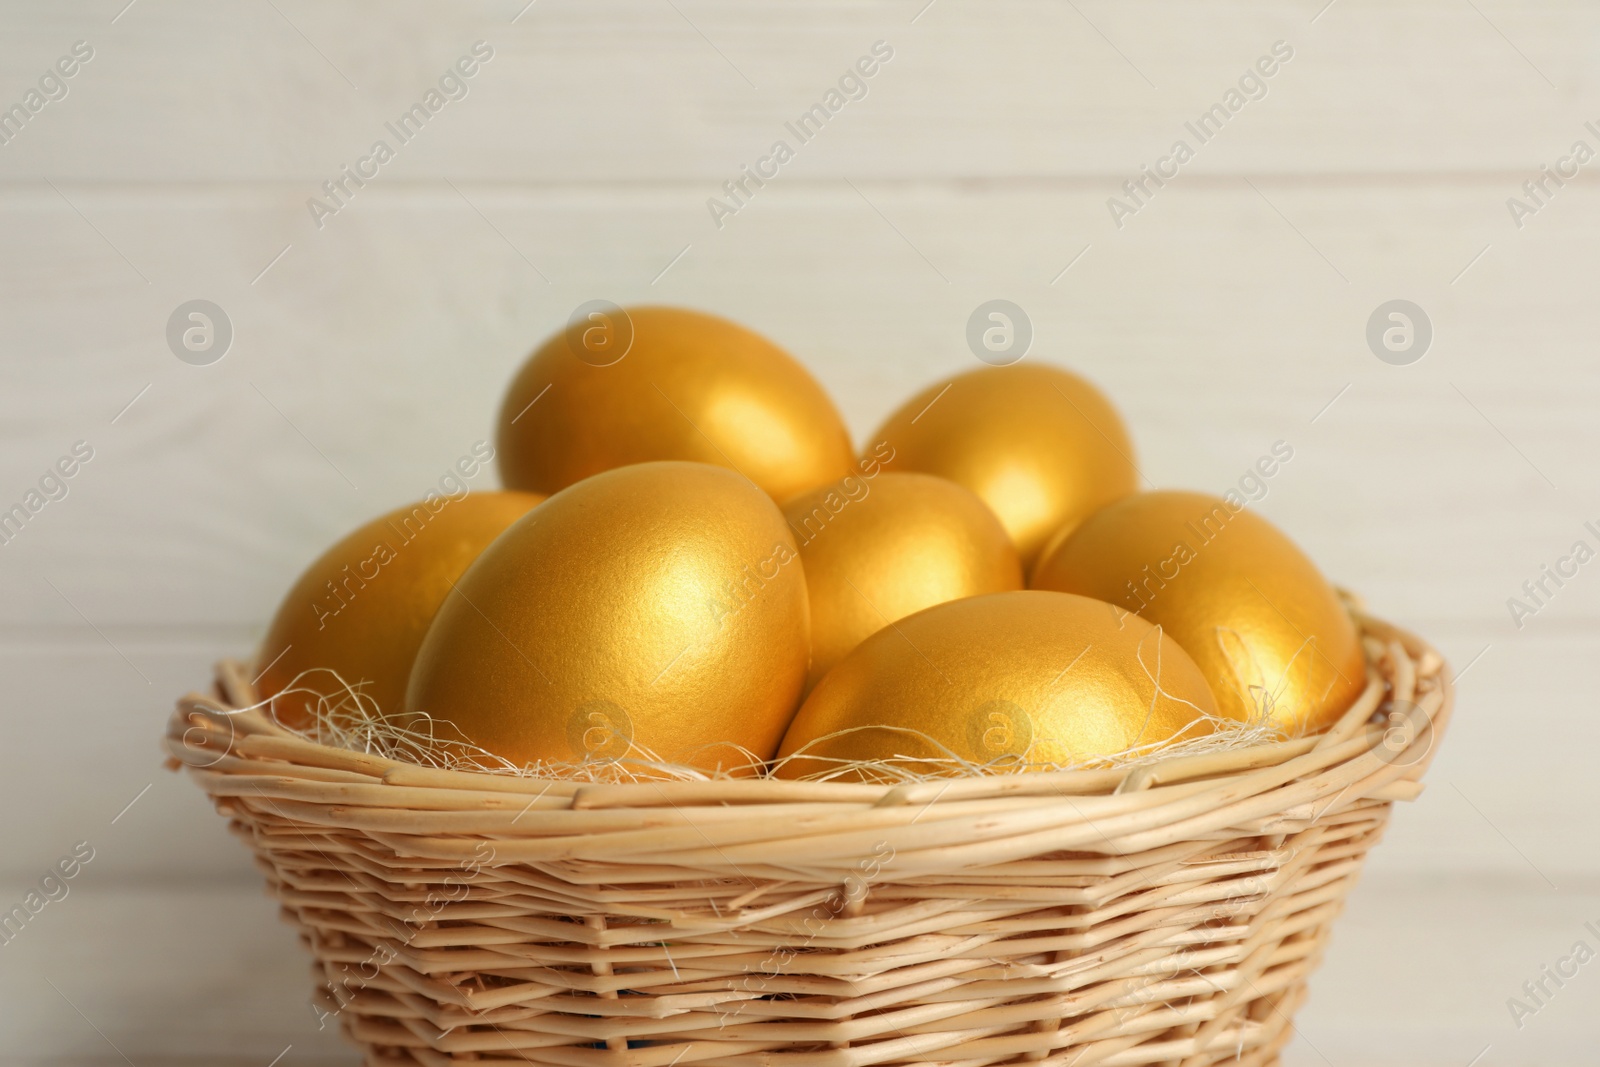 Photo of Shiny golden eggs in wicker basket on light background, closeup